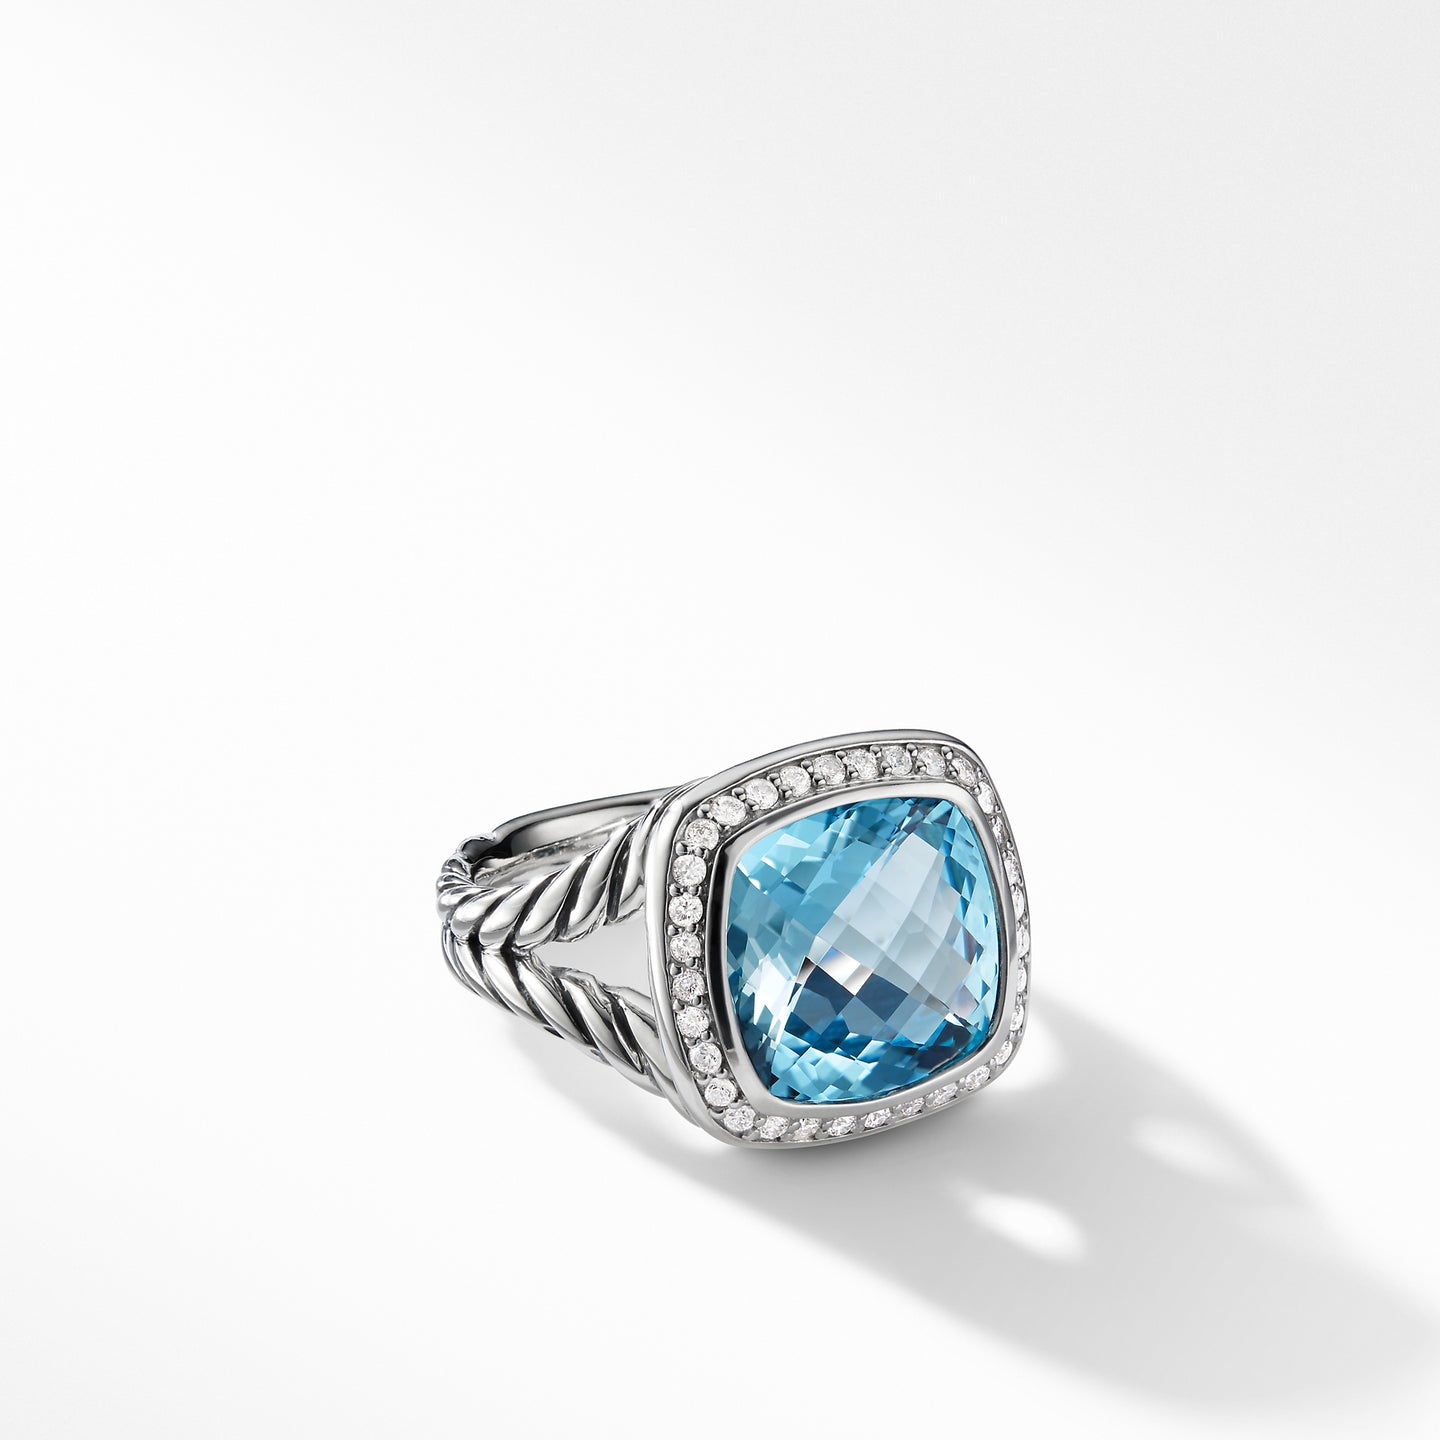 Ring with Blue Topaz and Diamonds, Size 6